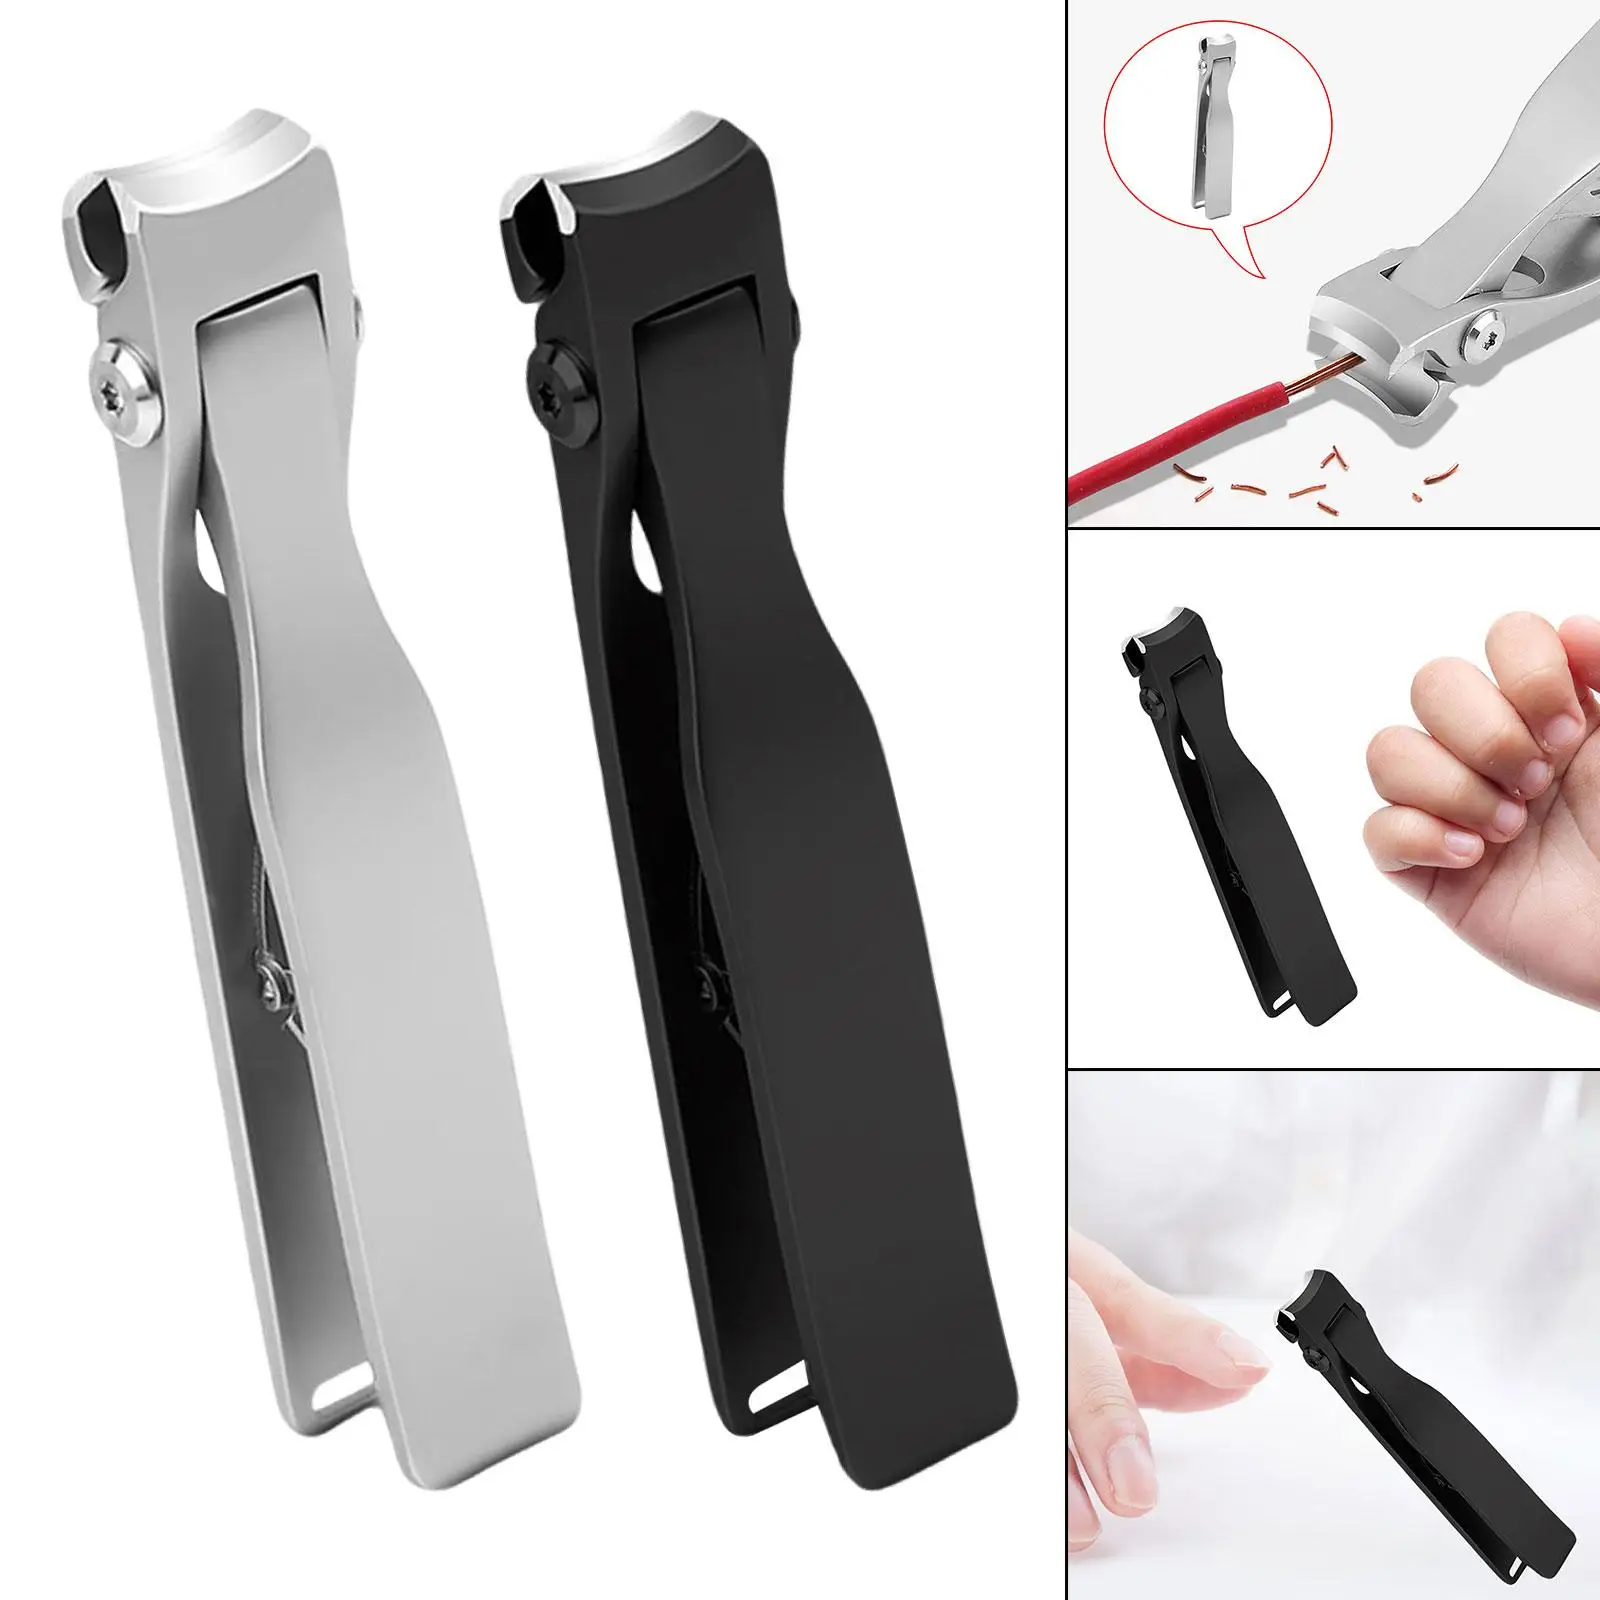 Toe Nail Clippers Nail Trimmer Anti Slip Comfort Grip Long Handle Durable Sharp Fingernail & Toenail Clippers for Thick Nails